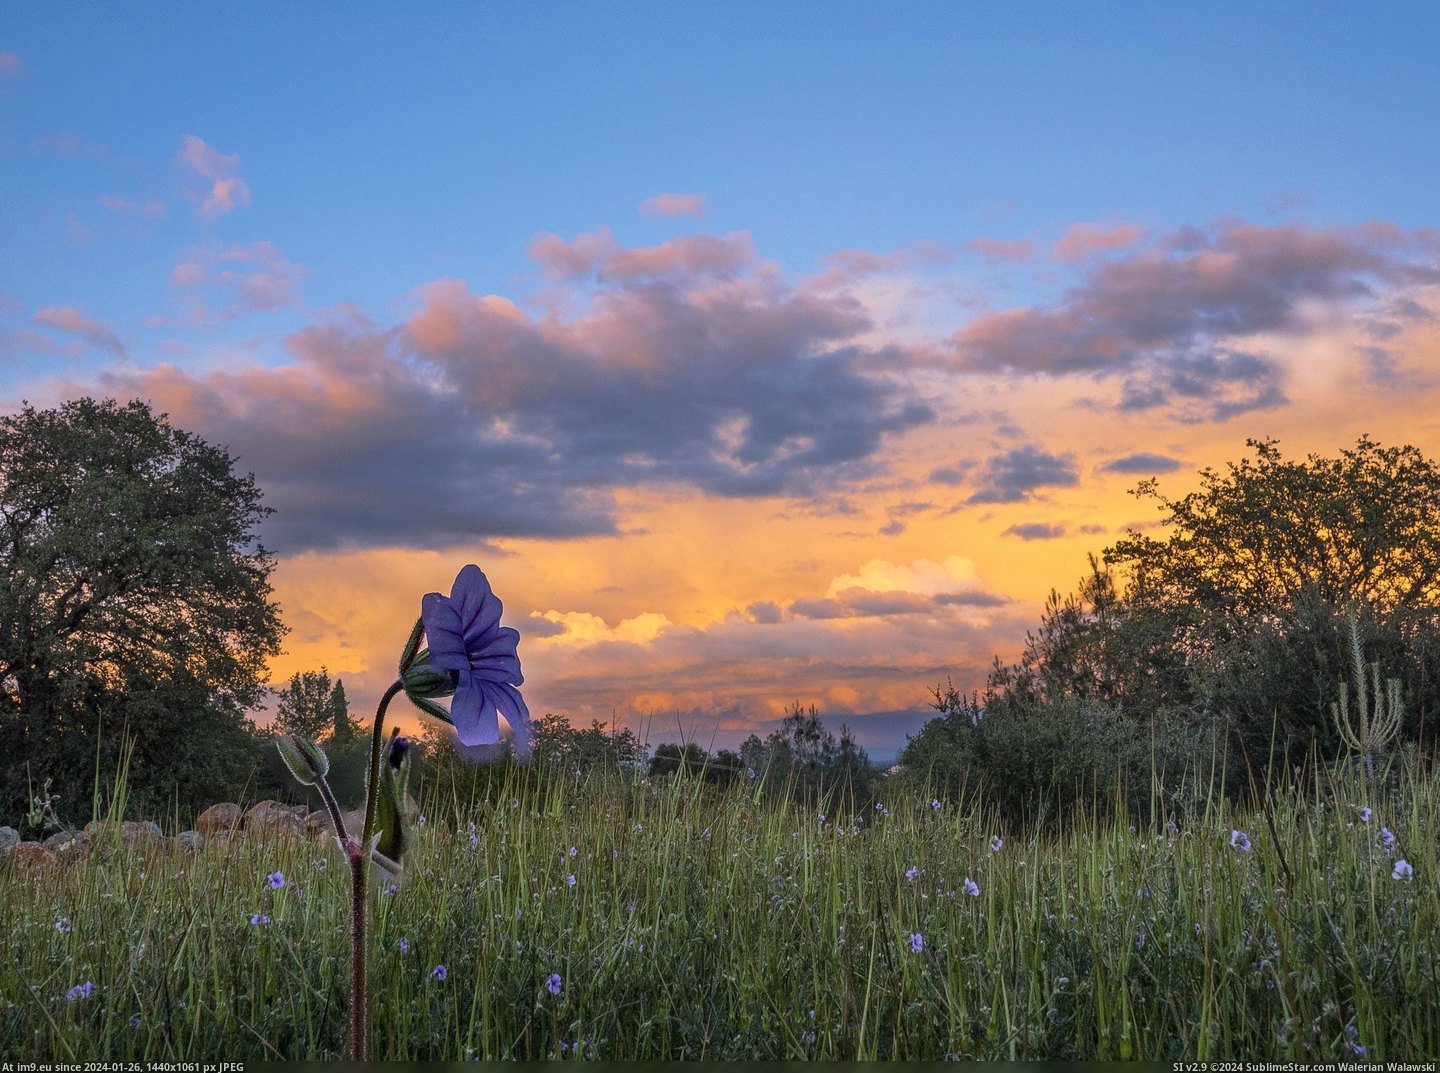 #California #Sunset #Storm #Evening #Redding #Flowers #Clouds [Earthporn] Storm clouds and flowers at sunset this evening in Redding California. [2712x2011] Pic. (Изображение из альбом My r/EARTHPORN favs))